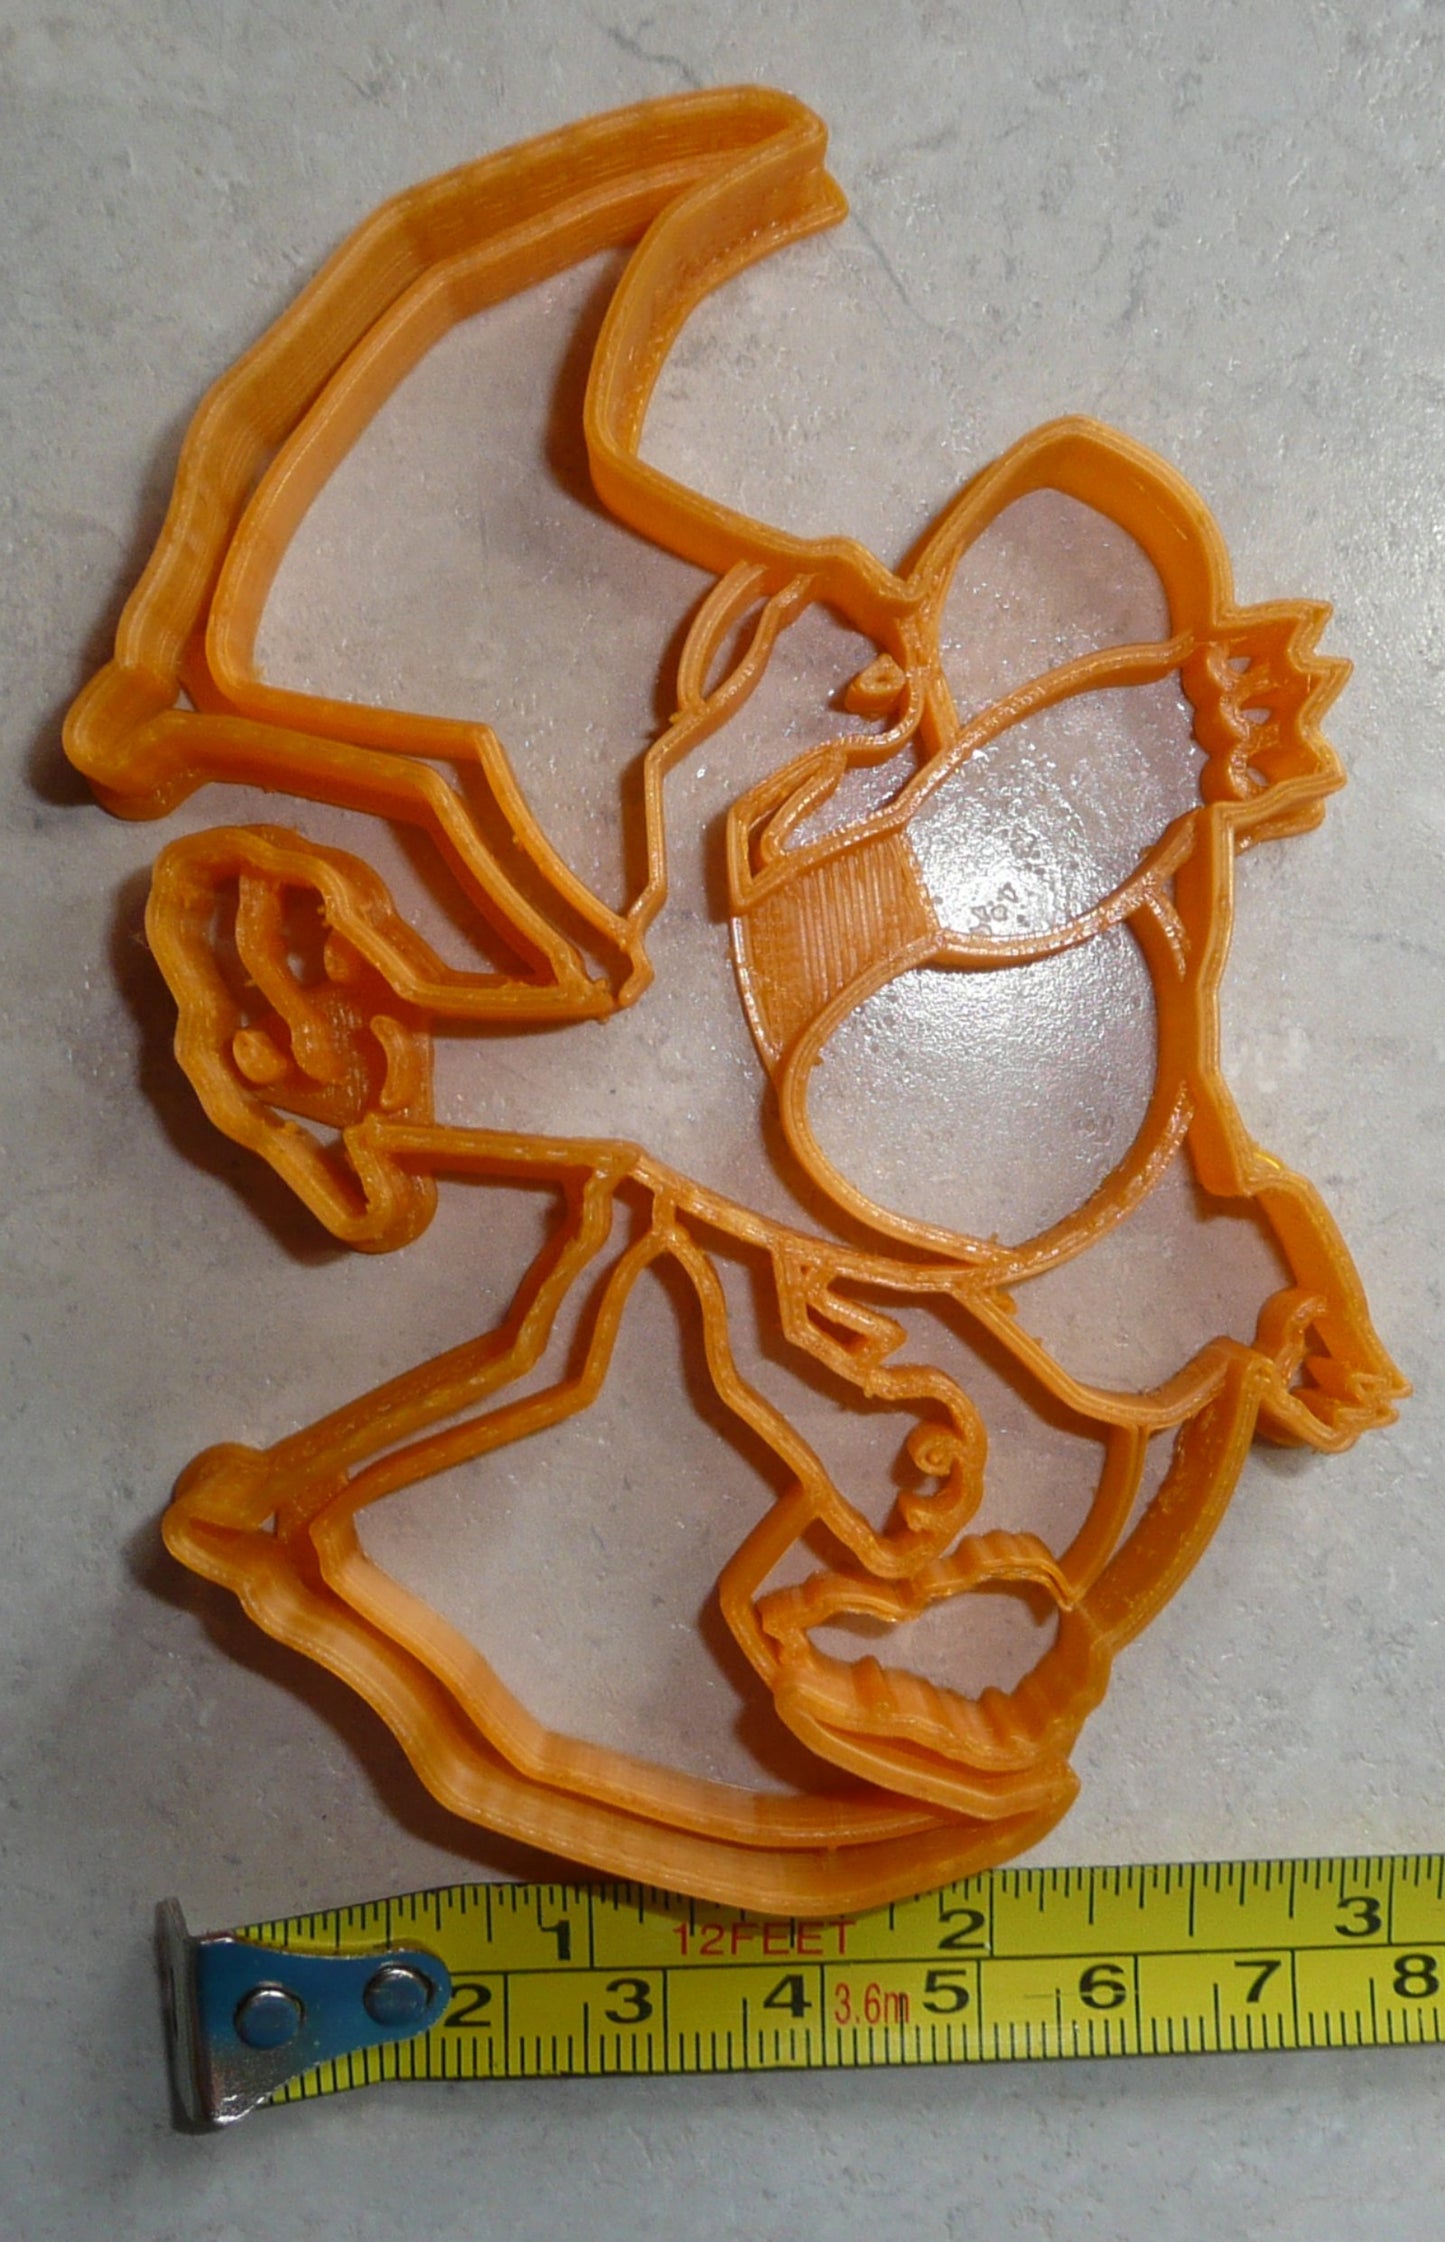 Charizard Fire Flying Character Pokemon Charmeleon Cookie Cutter USA PR2467